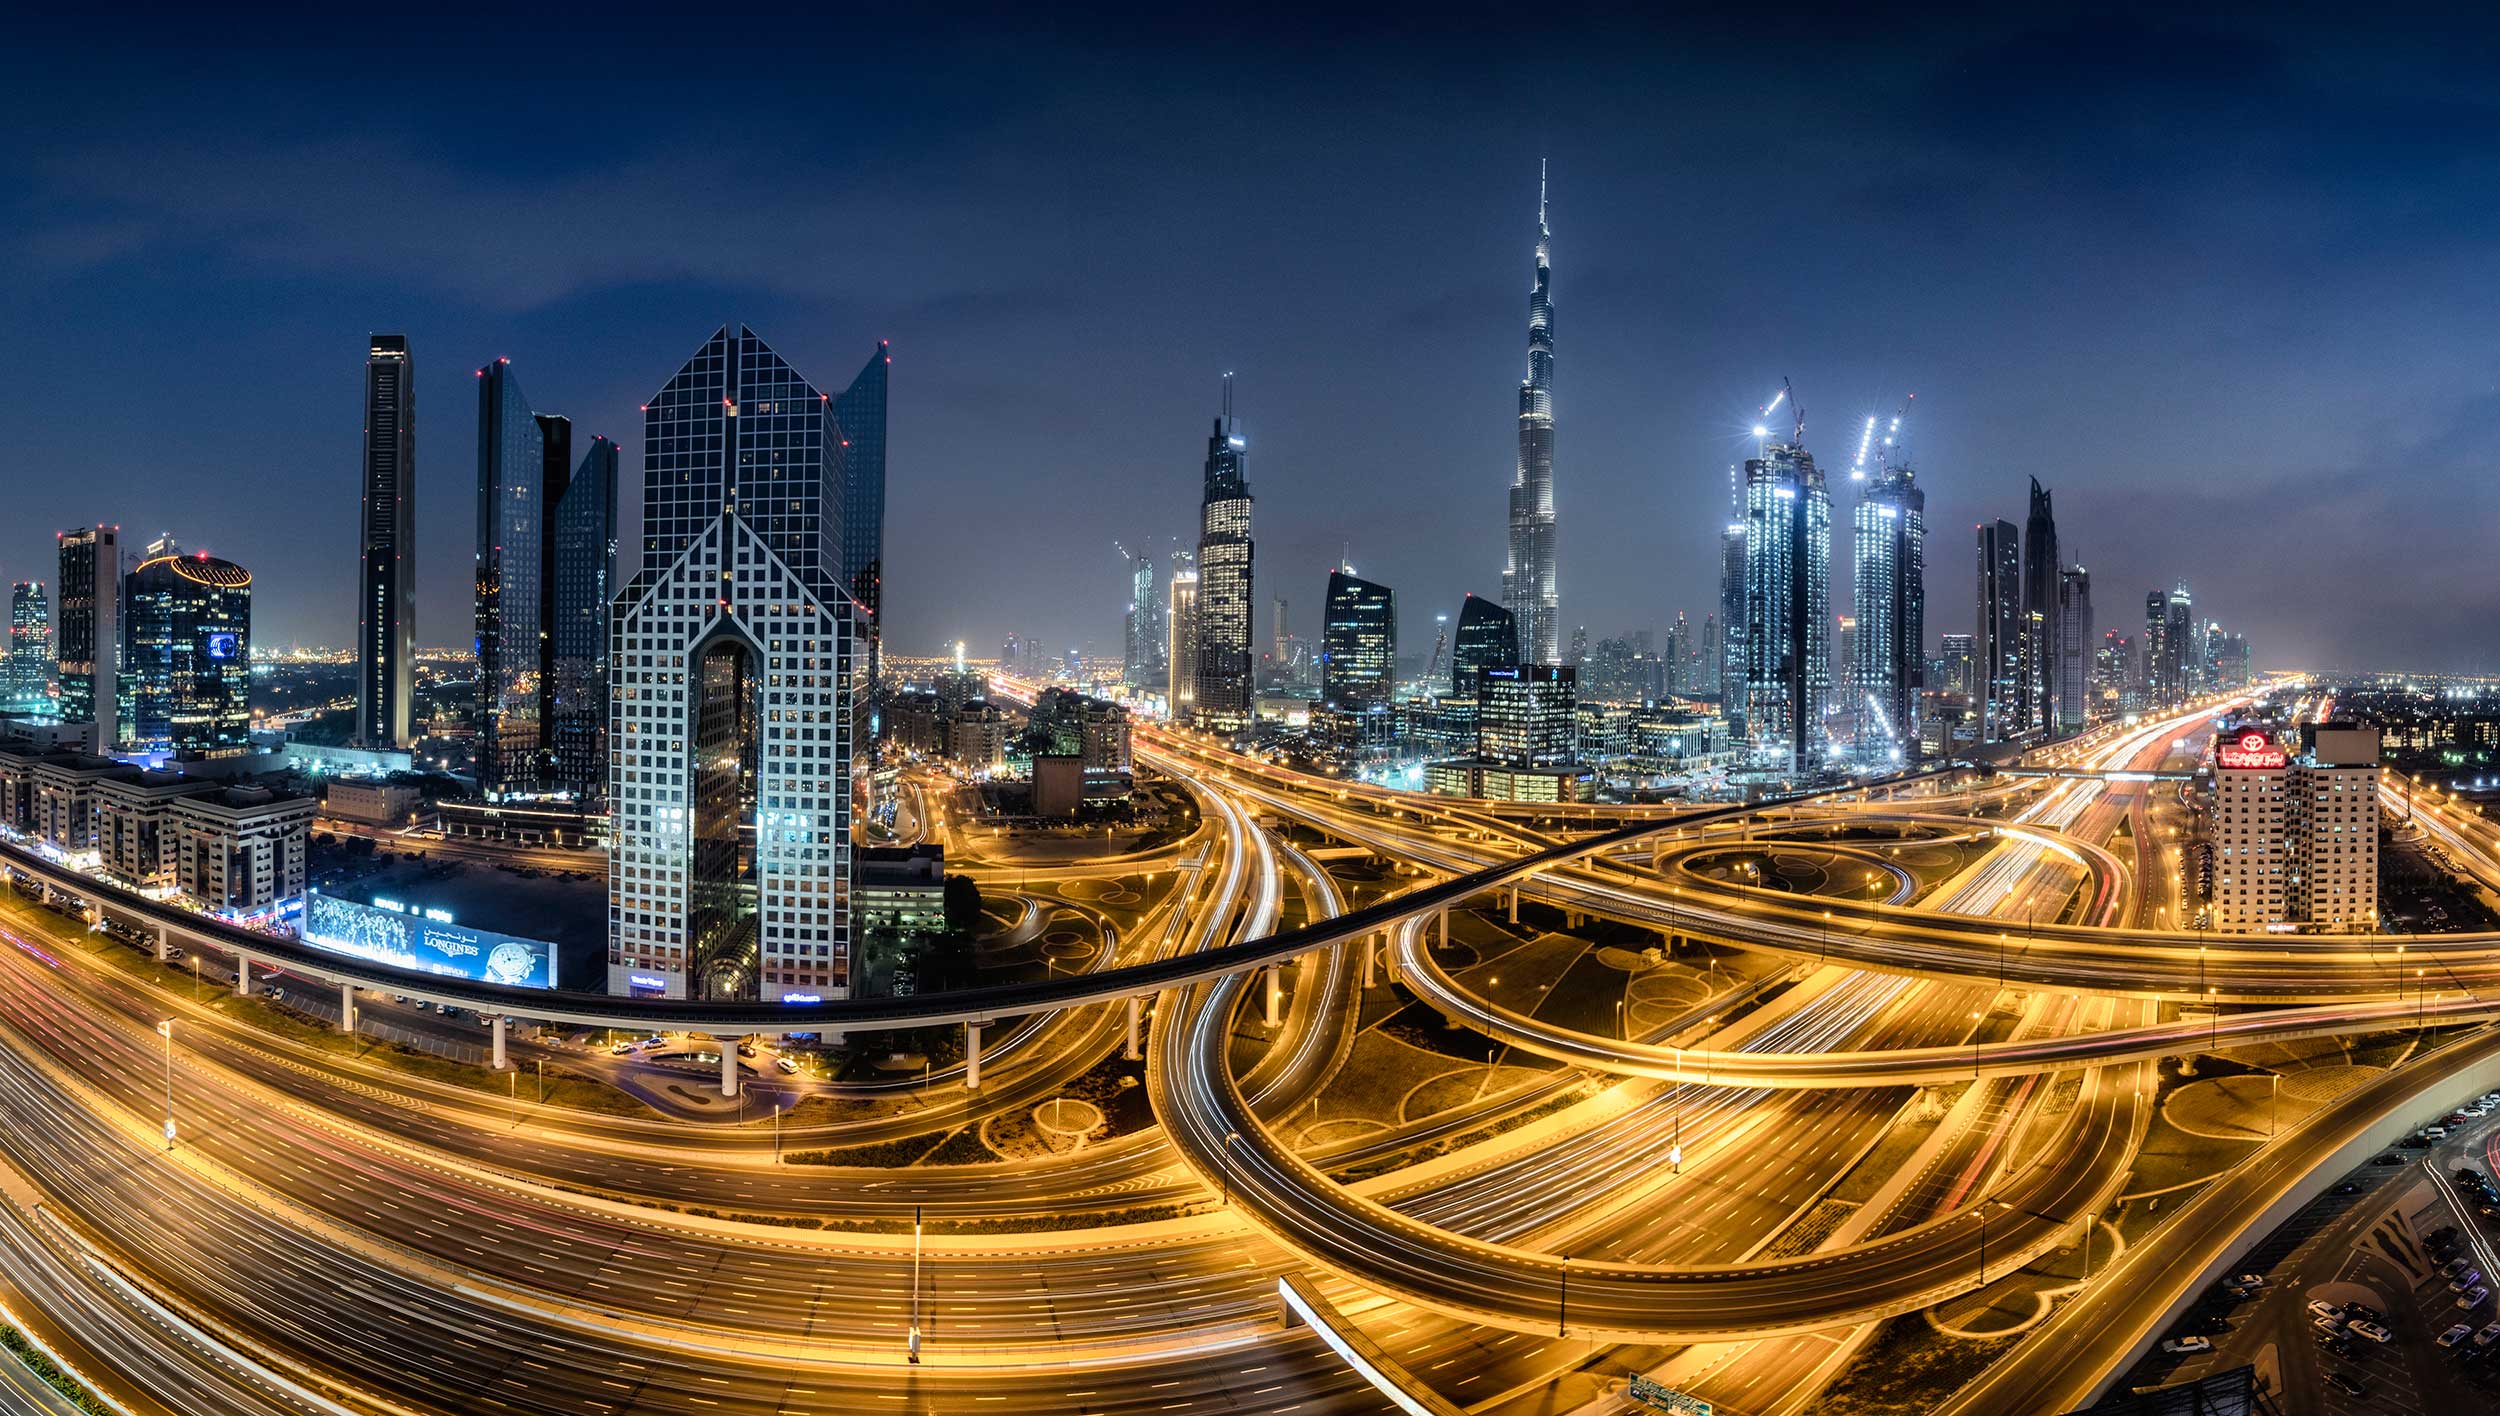 The skyscrapers, flyovers and highways of Dubai all lighted up at night